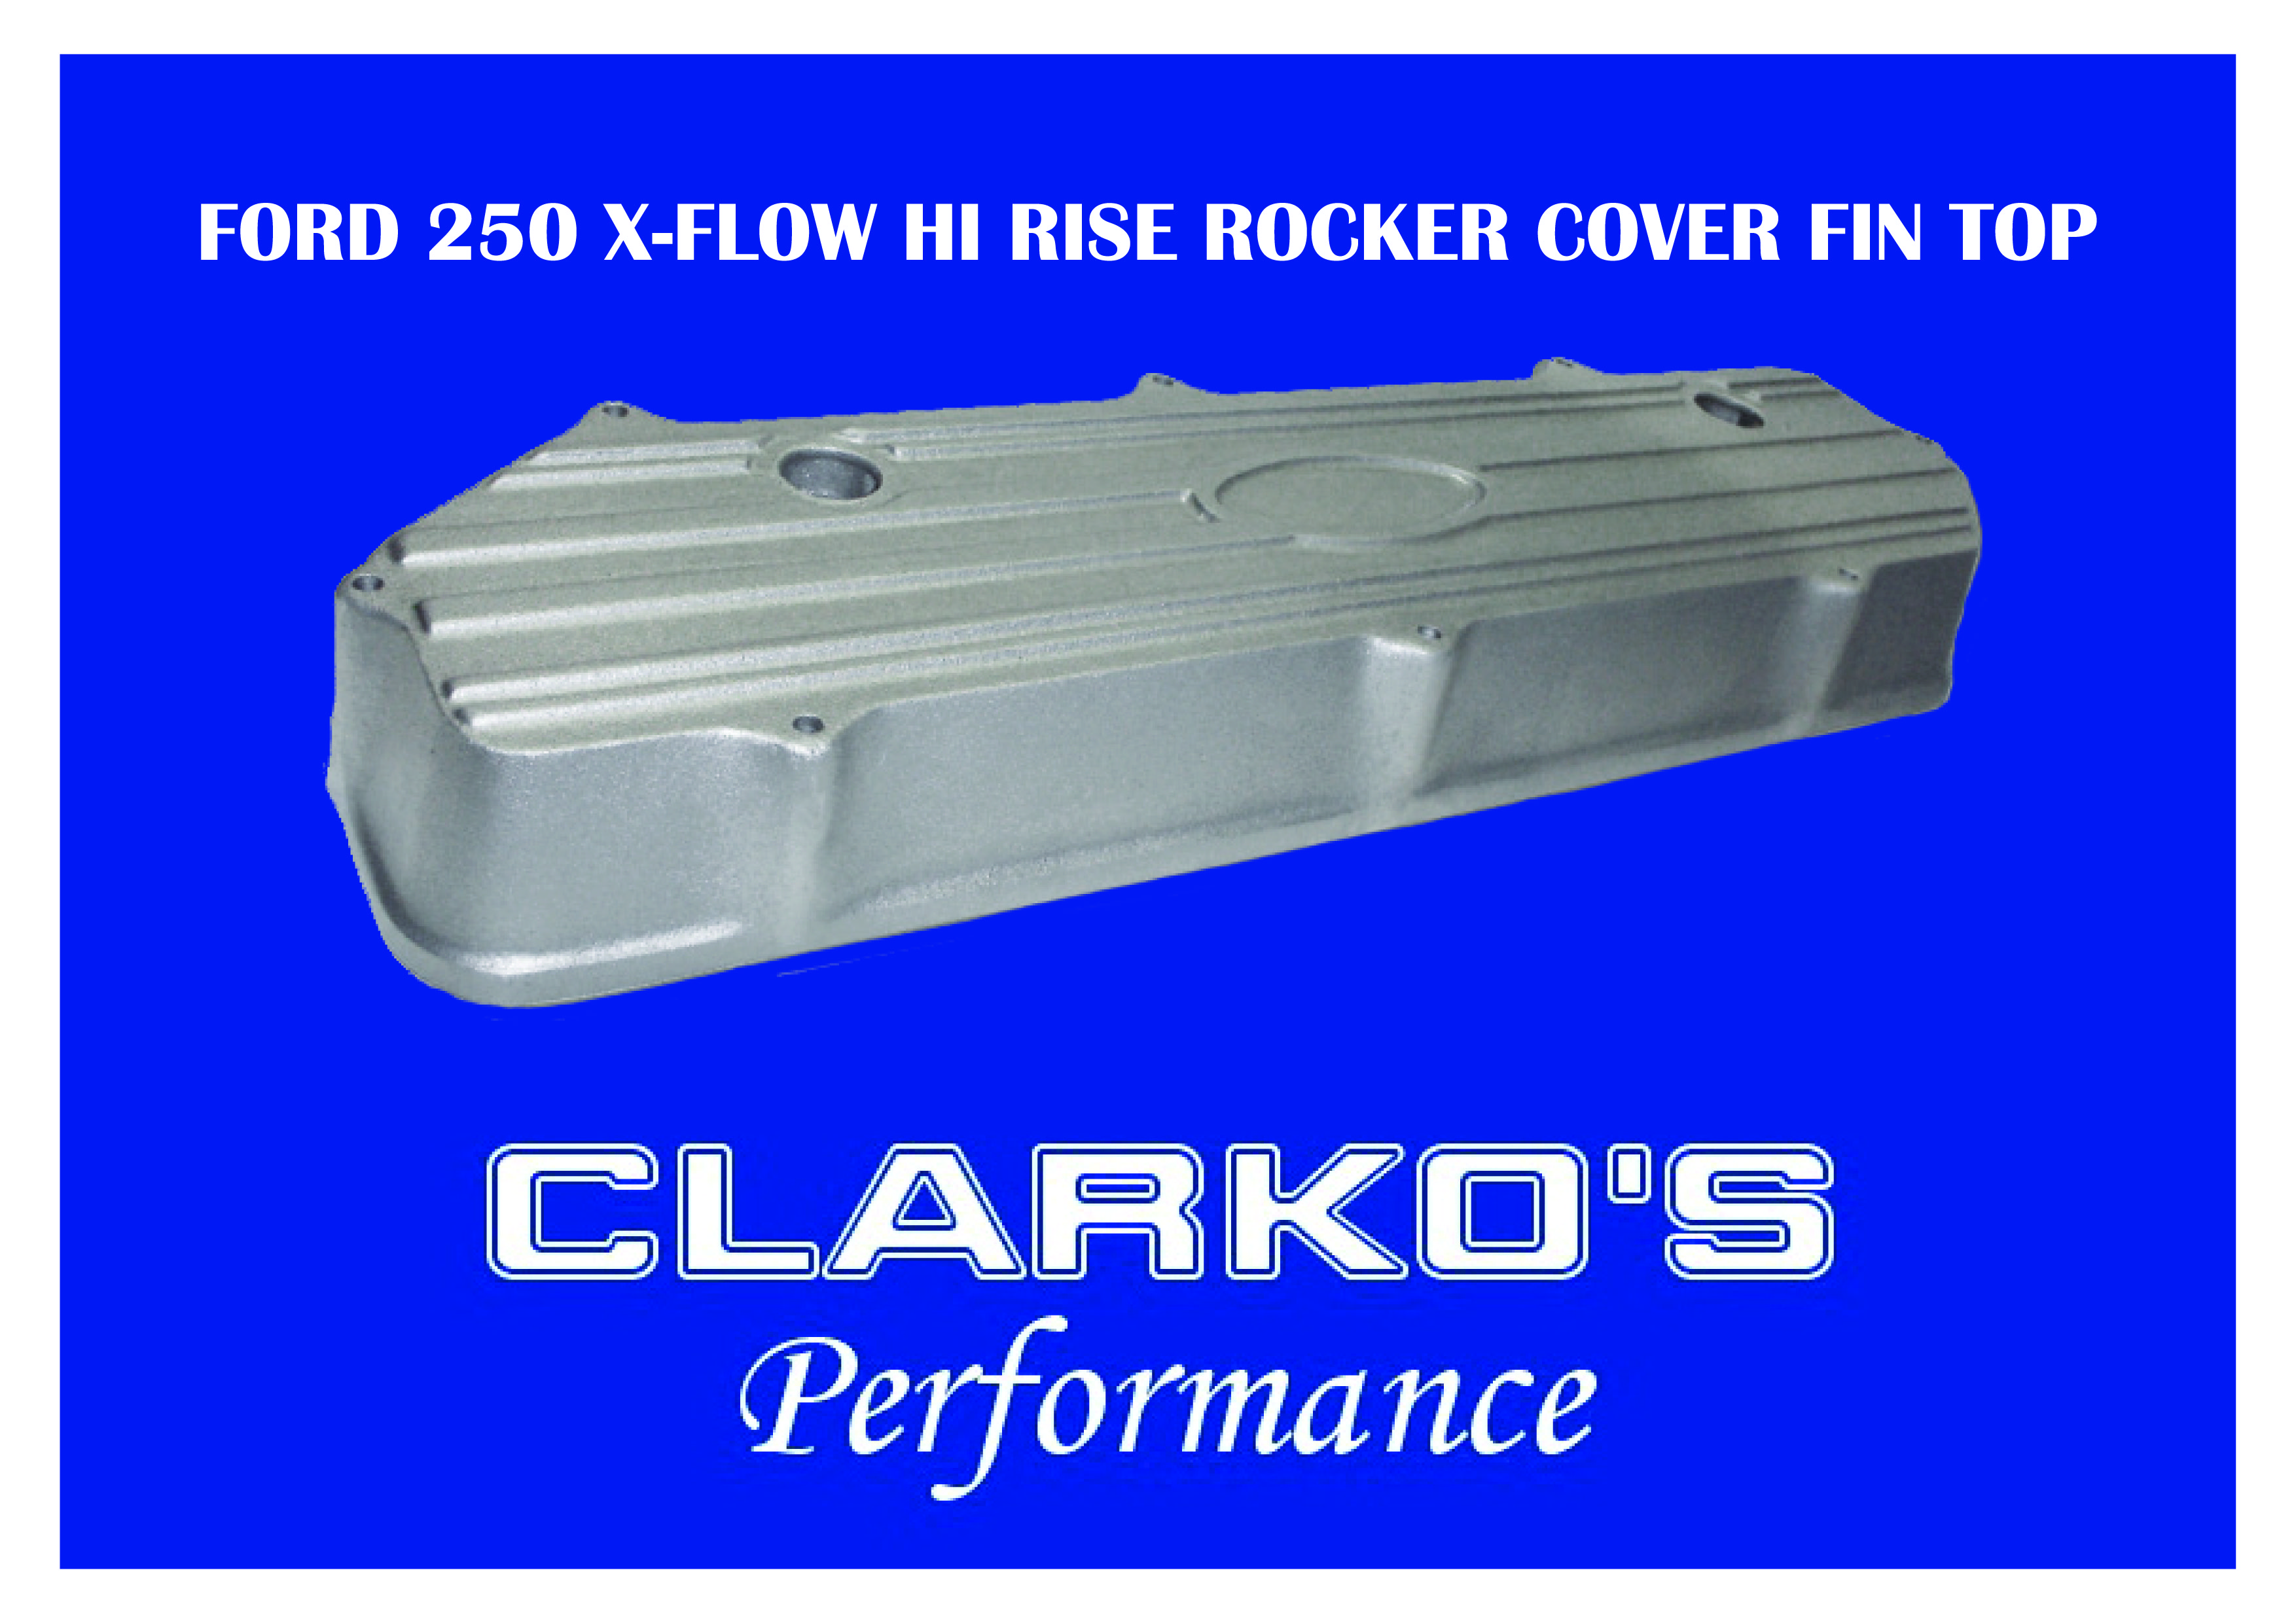 Ford 6cyl rocker covers